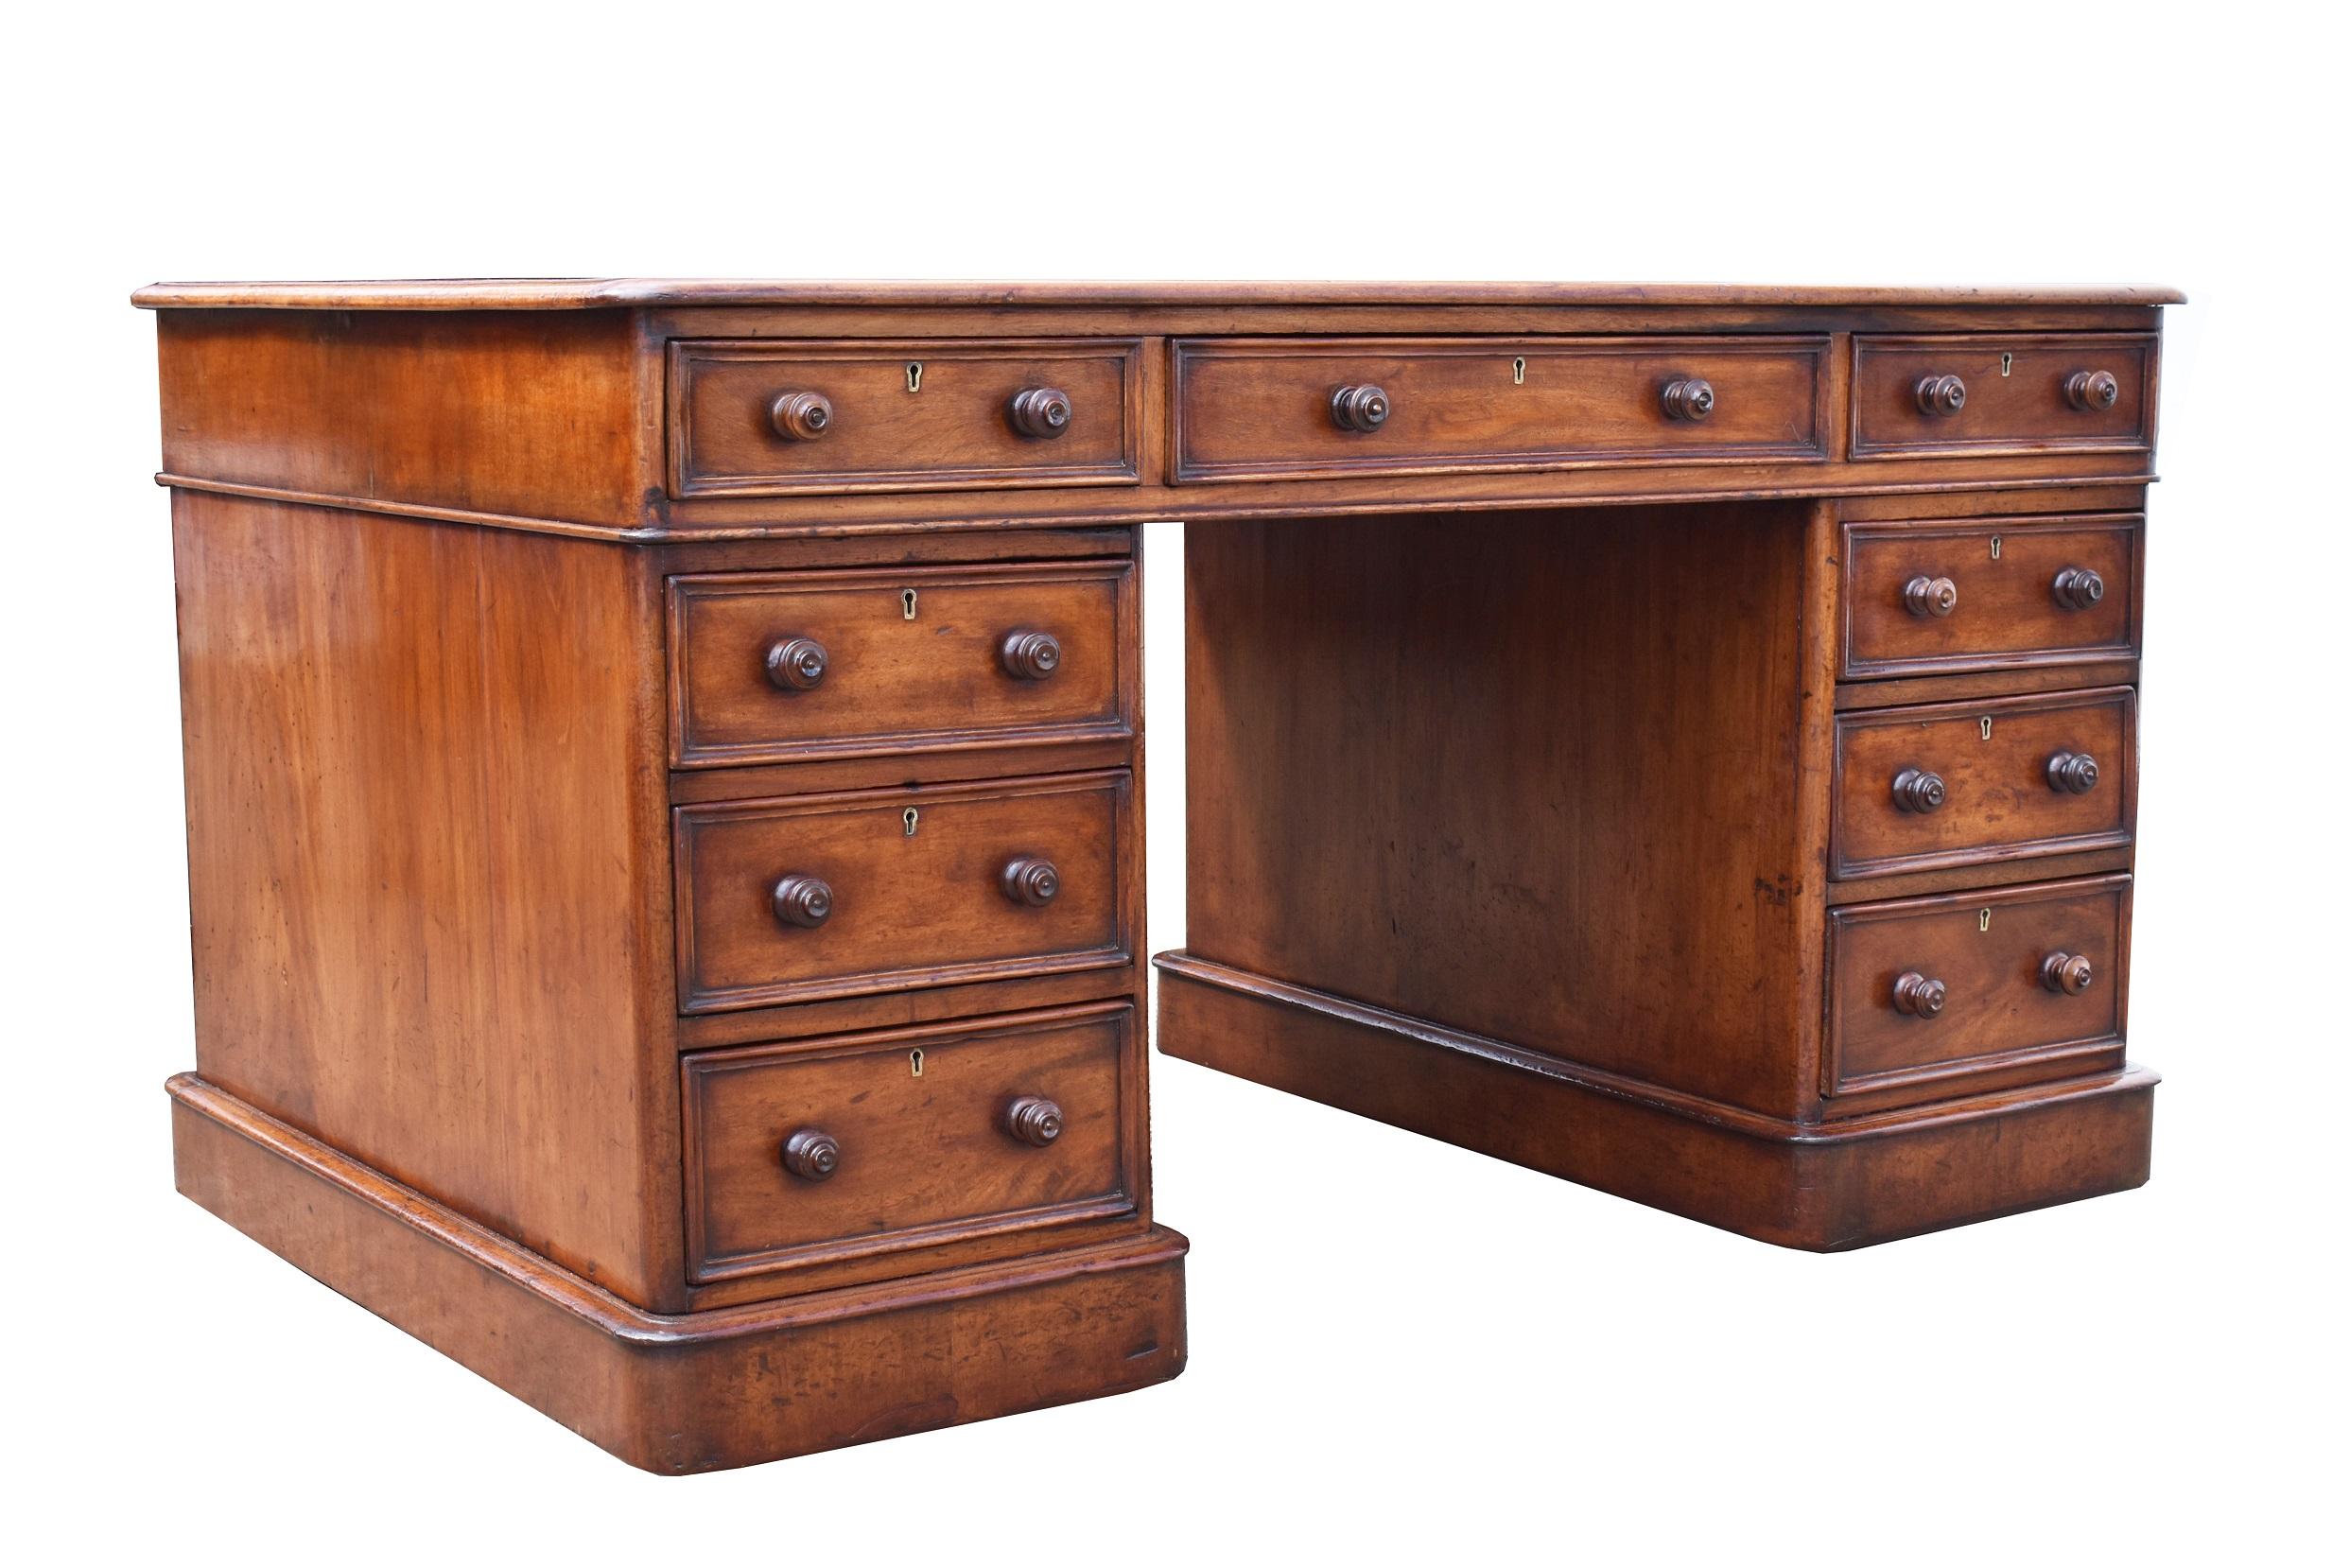 For sale is a good quality Victorian mahogany partners desk, the top being inset with a red leather, decorated with gold tooling. Below this the top has a total of six drawers, three to the front and a further three on the opposing side. The top